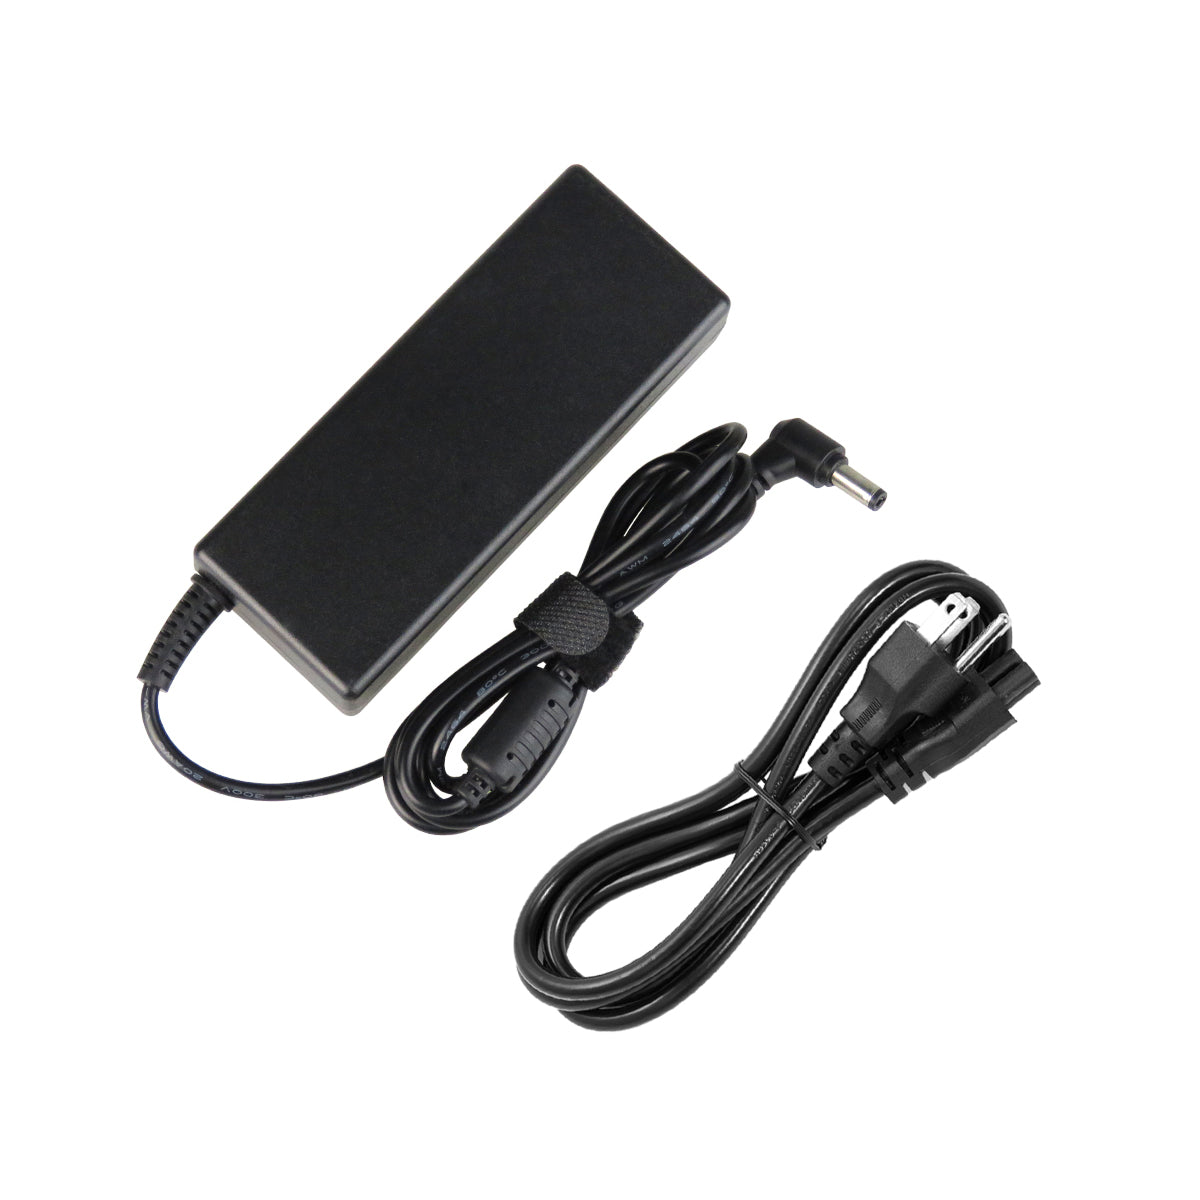 AC Adapter Charger for ASUS N82JG Notebook.